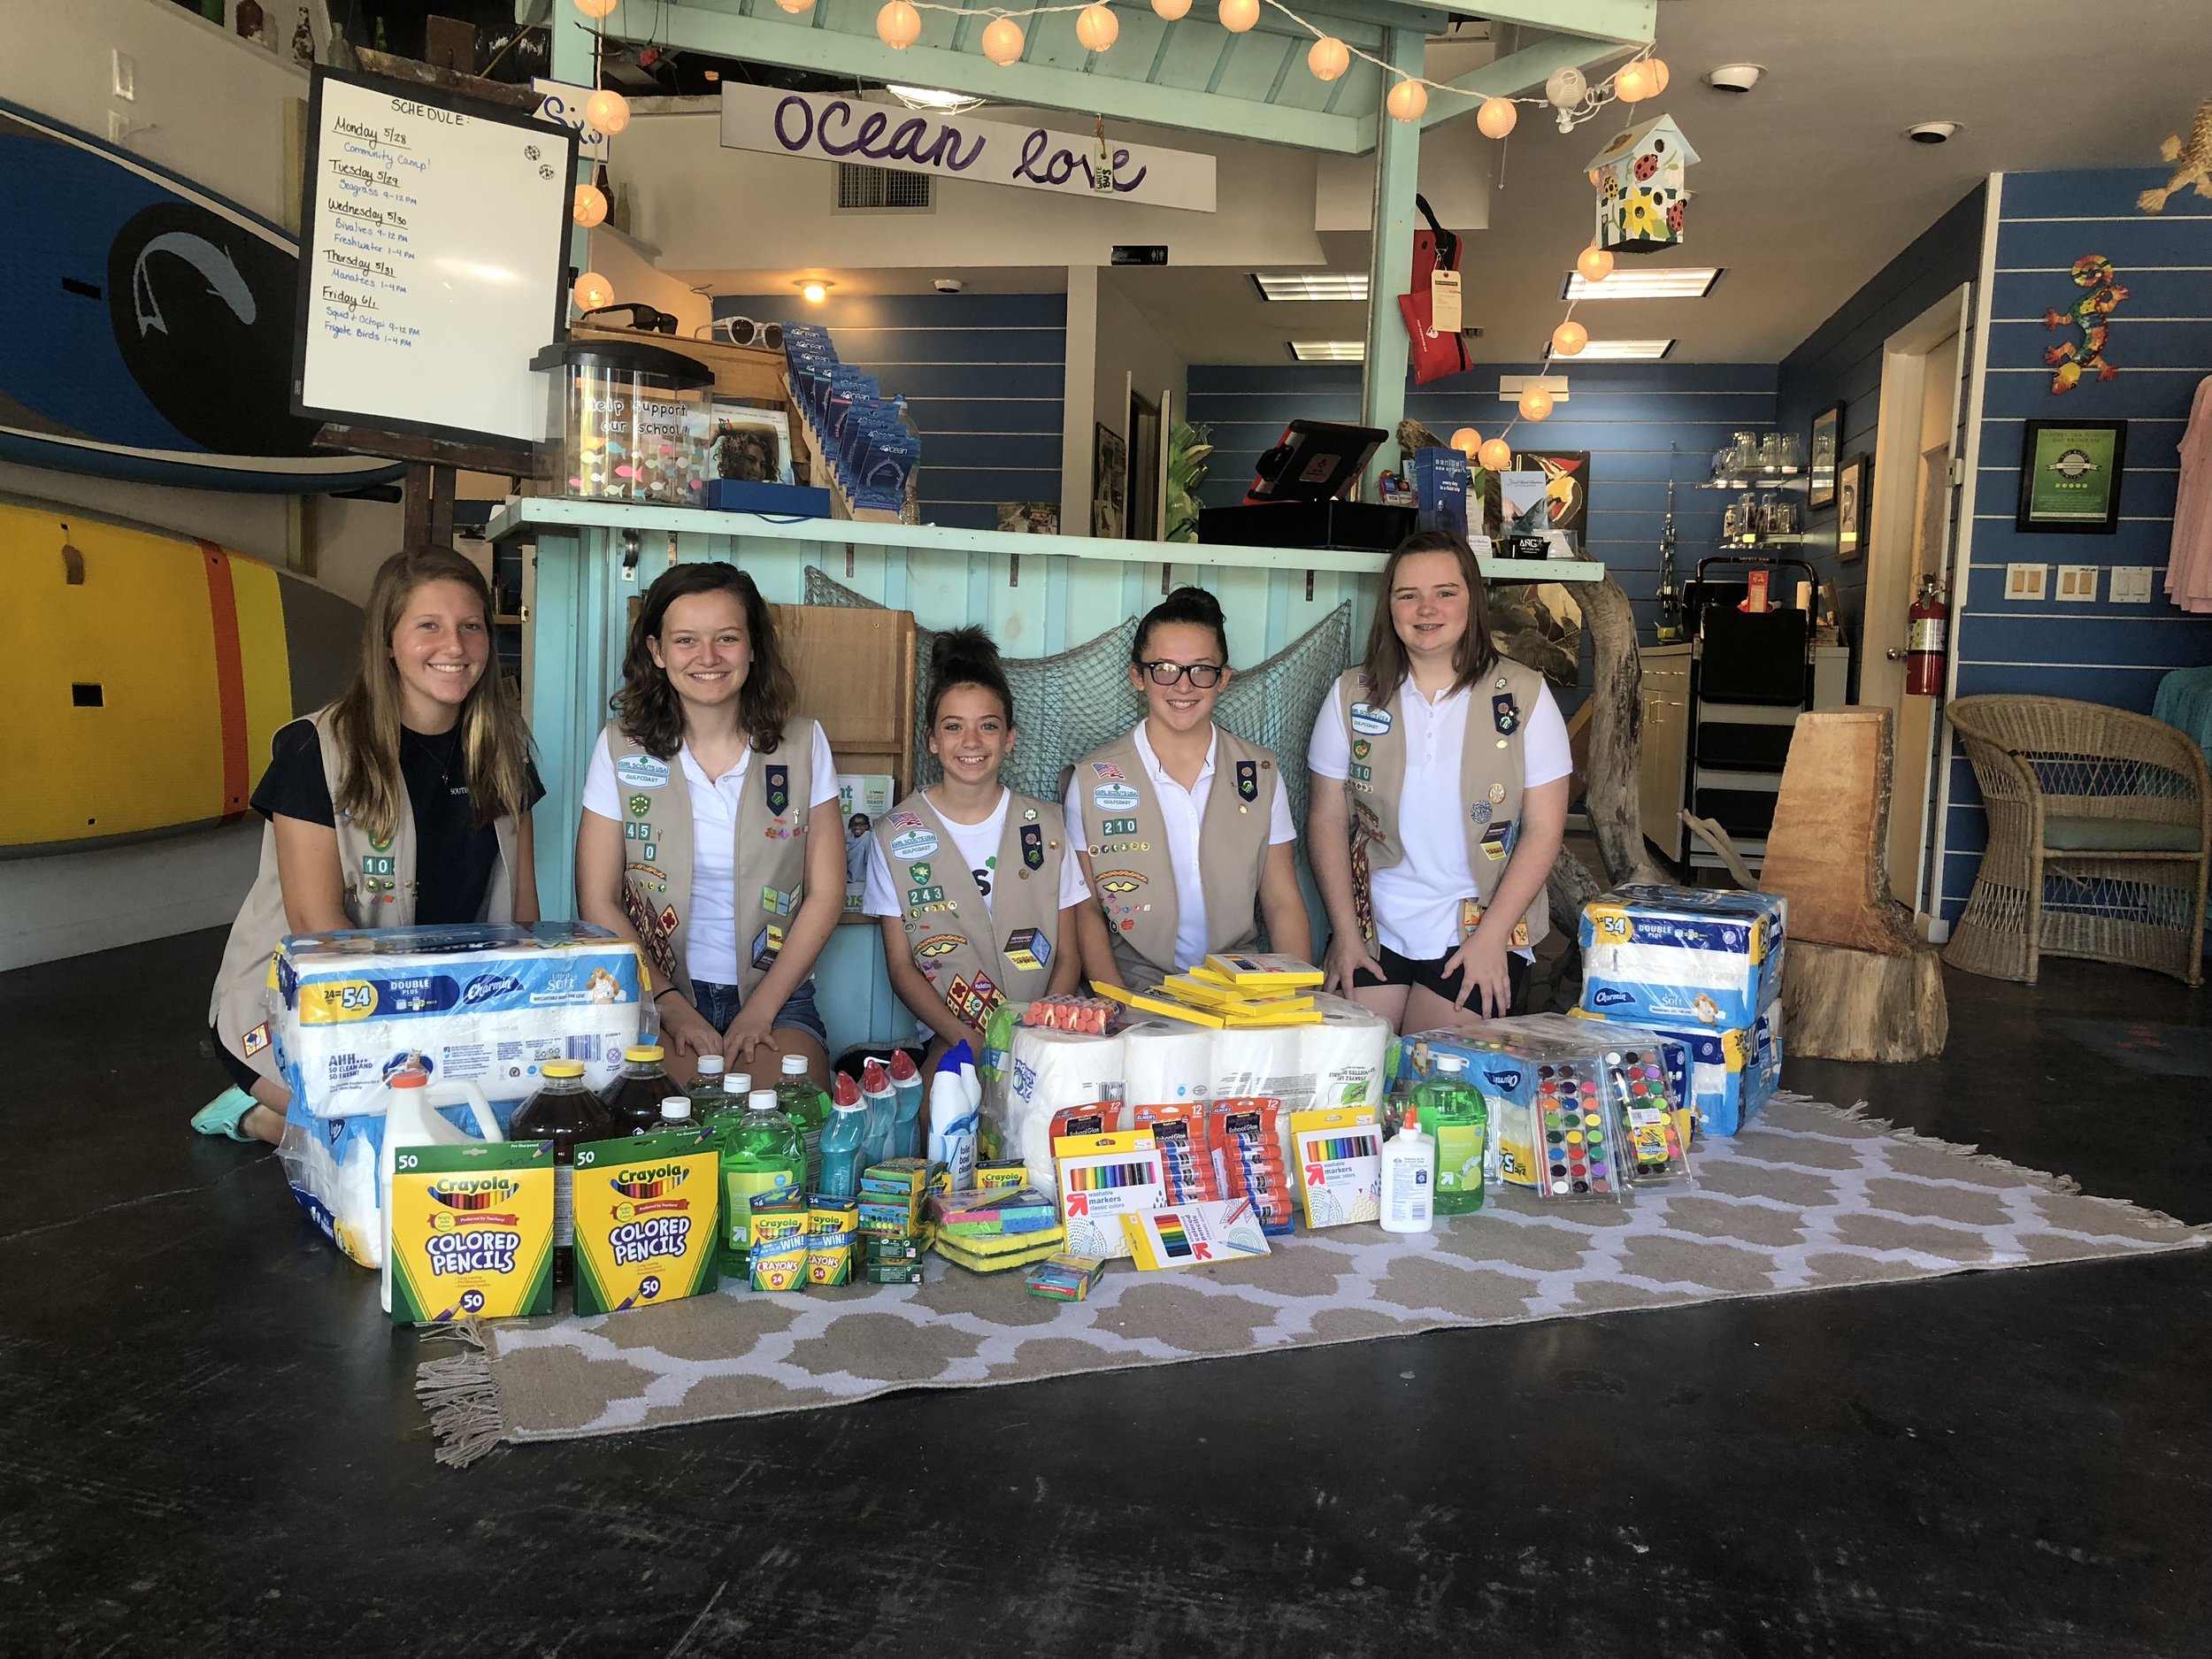 Girl Scout Troop 210 members Courtney Dingerson, Delaney Blackwell, Mia Sedorchuk, Isabella Lauzon, and Zoe Sedorchuk delivered a donation of supplies to Sanibel Sea School.&nbsp;